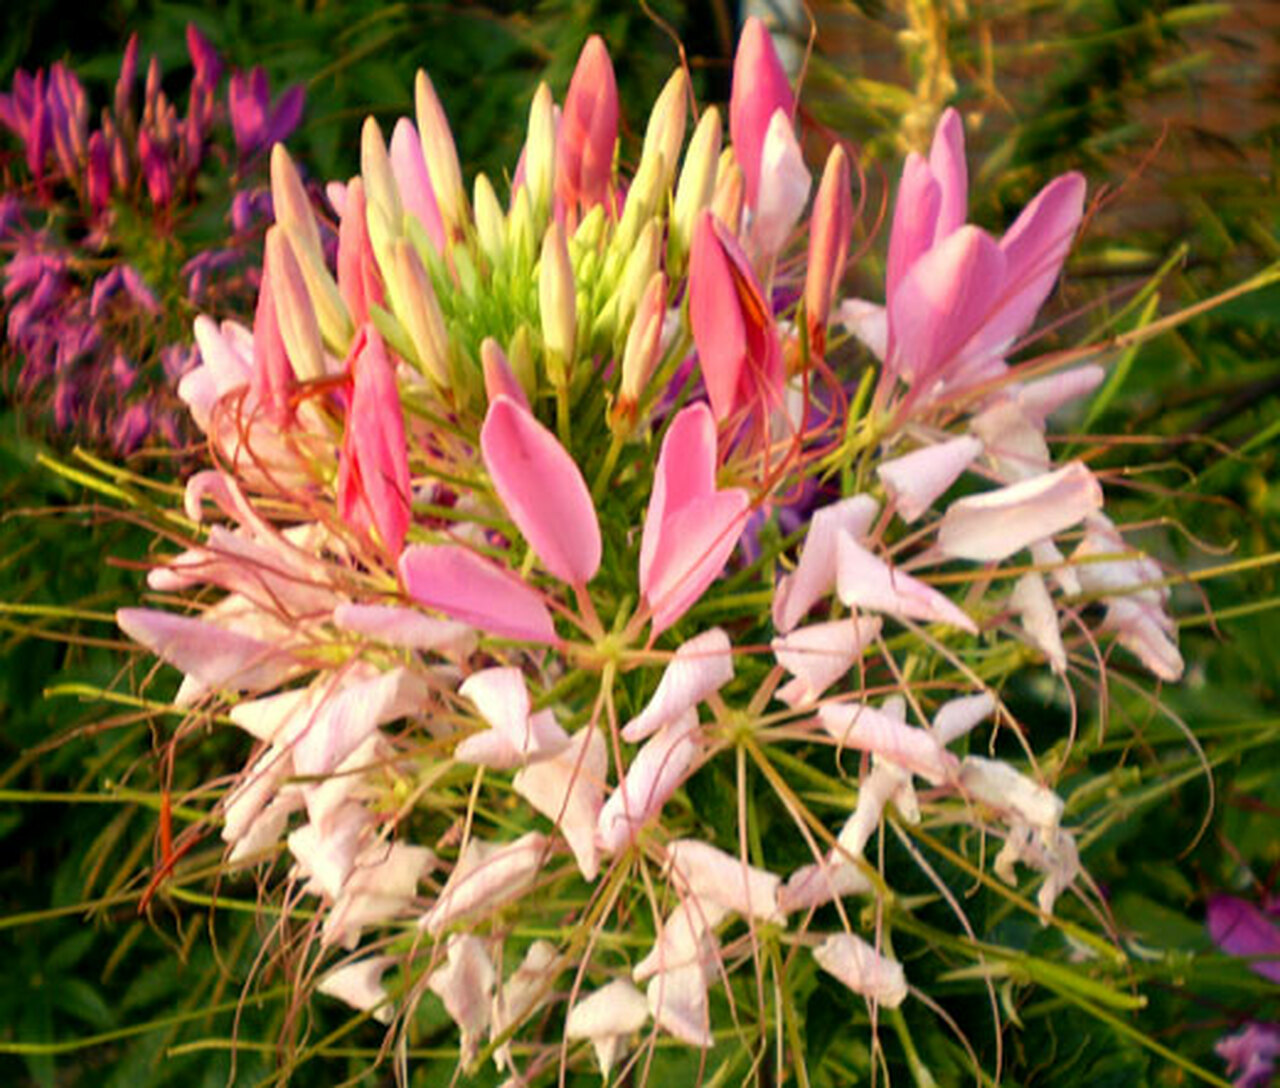 Cleome Hassleriana. Top 10 Flowers That Look Like Fireworks - 12